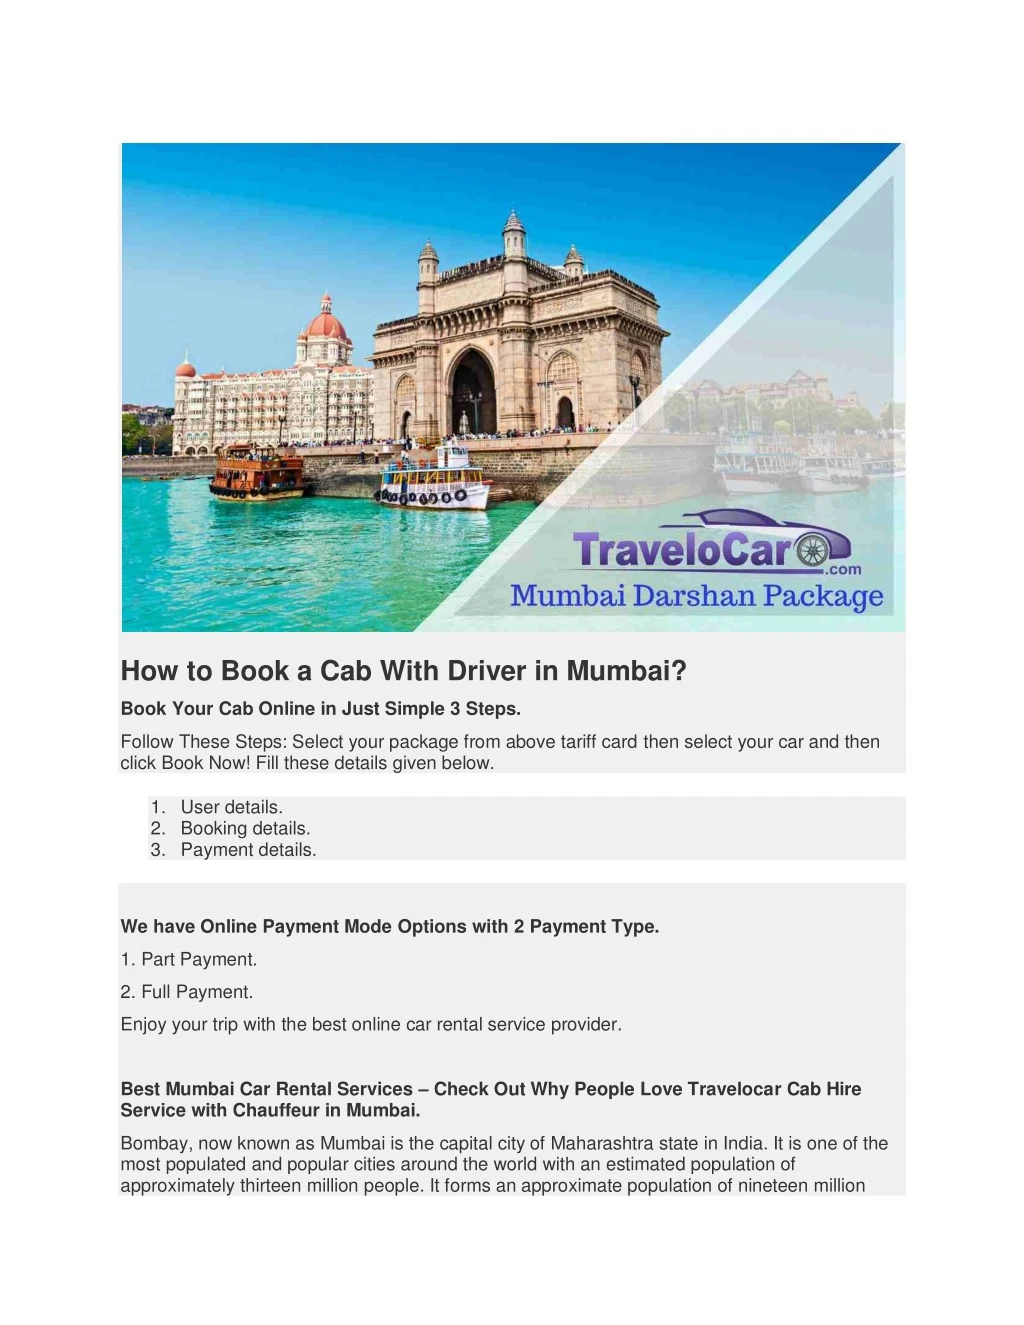 how to book a cab with driver in mumbai